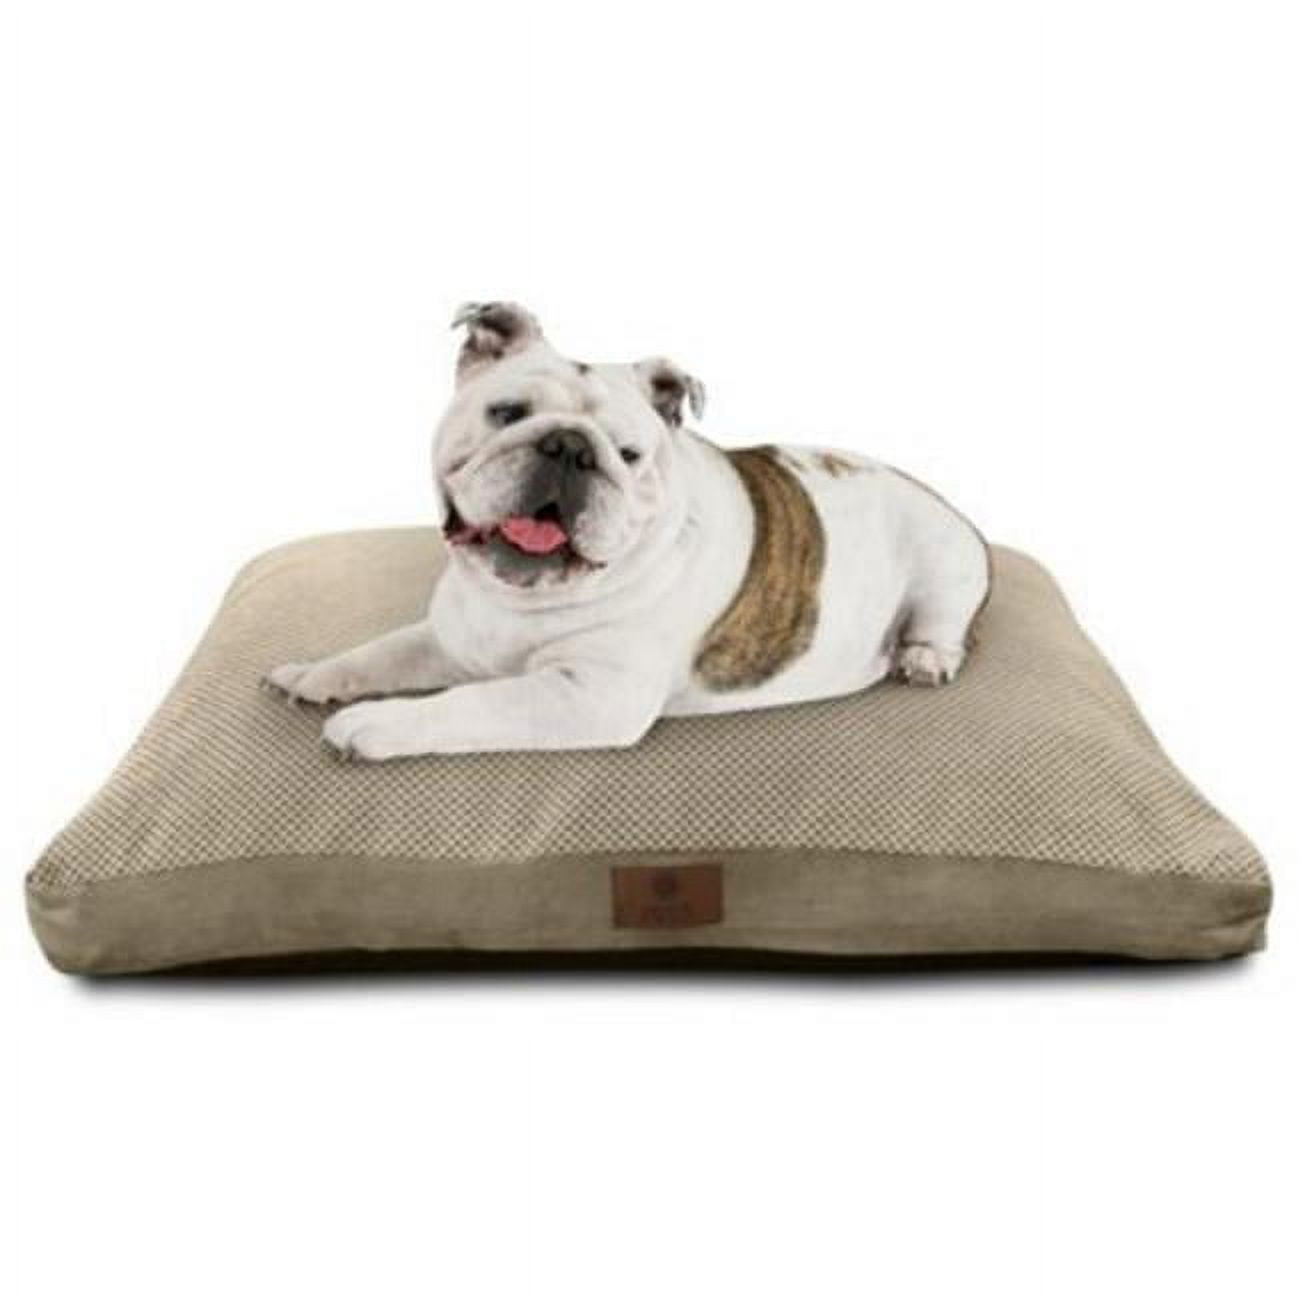 Akc9284tr 27x36 Large Gusseted Pet Bed